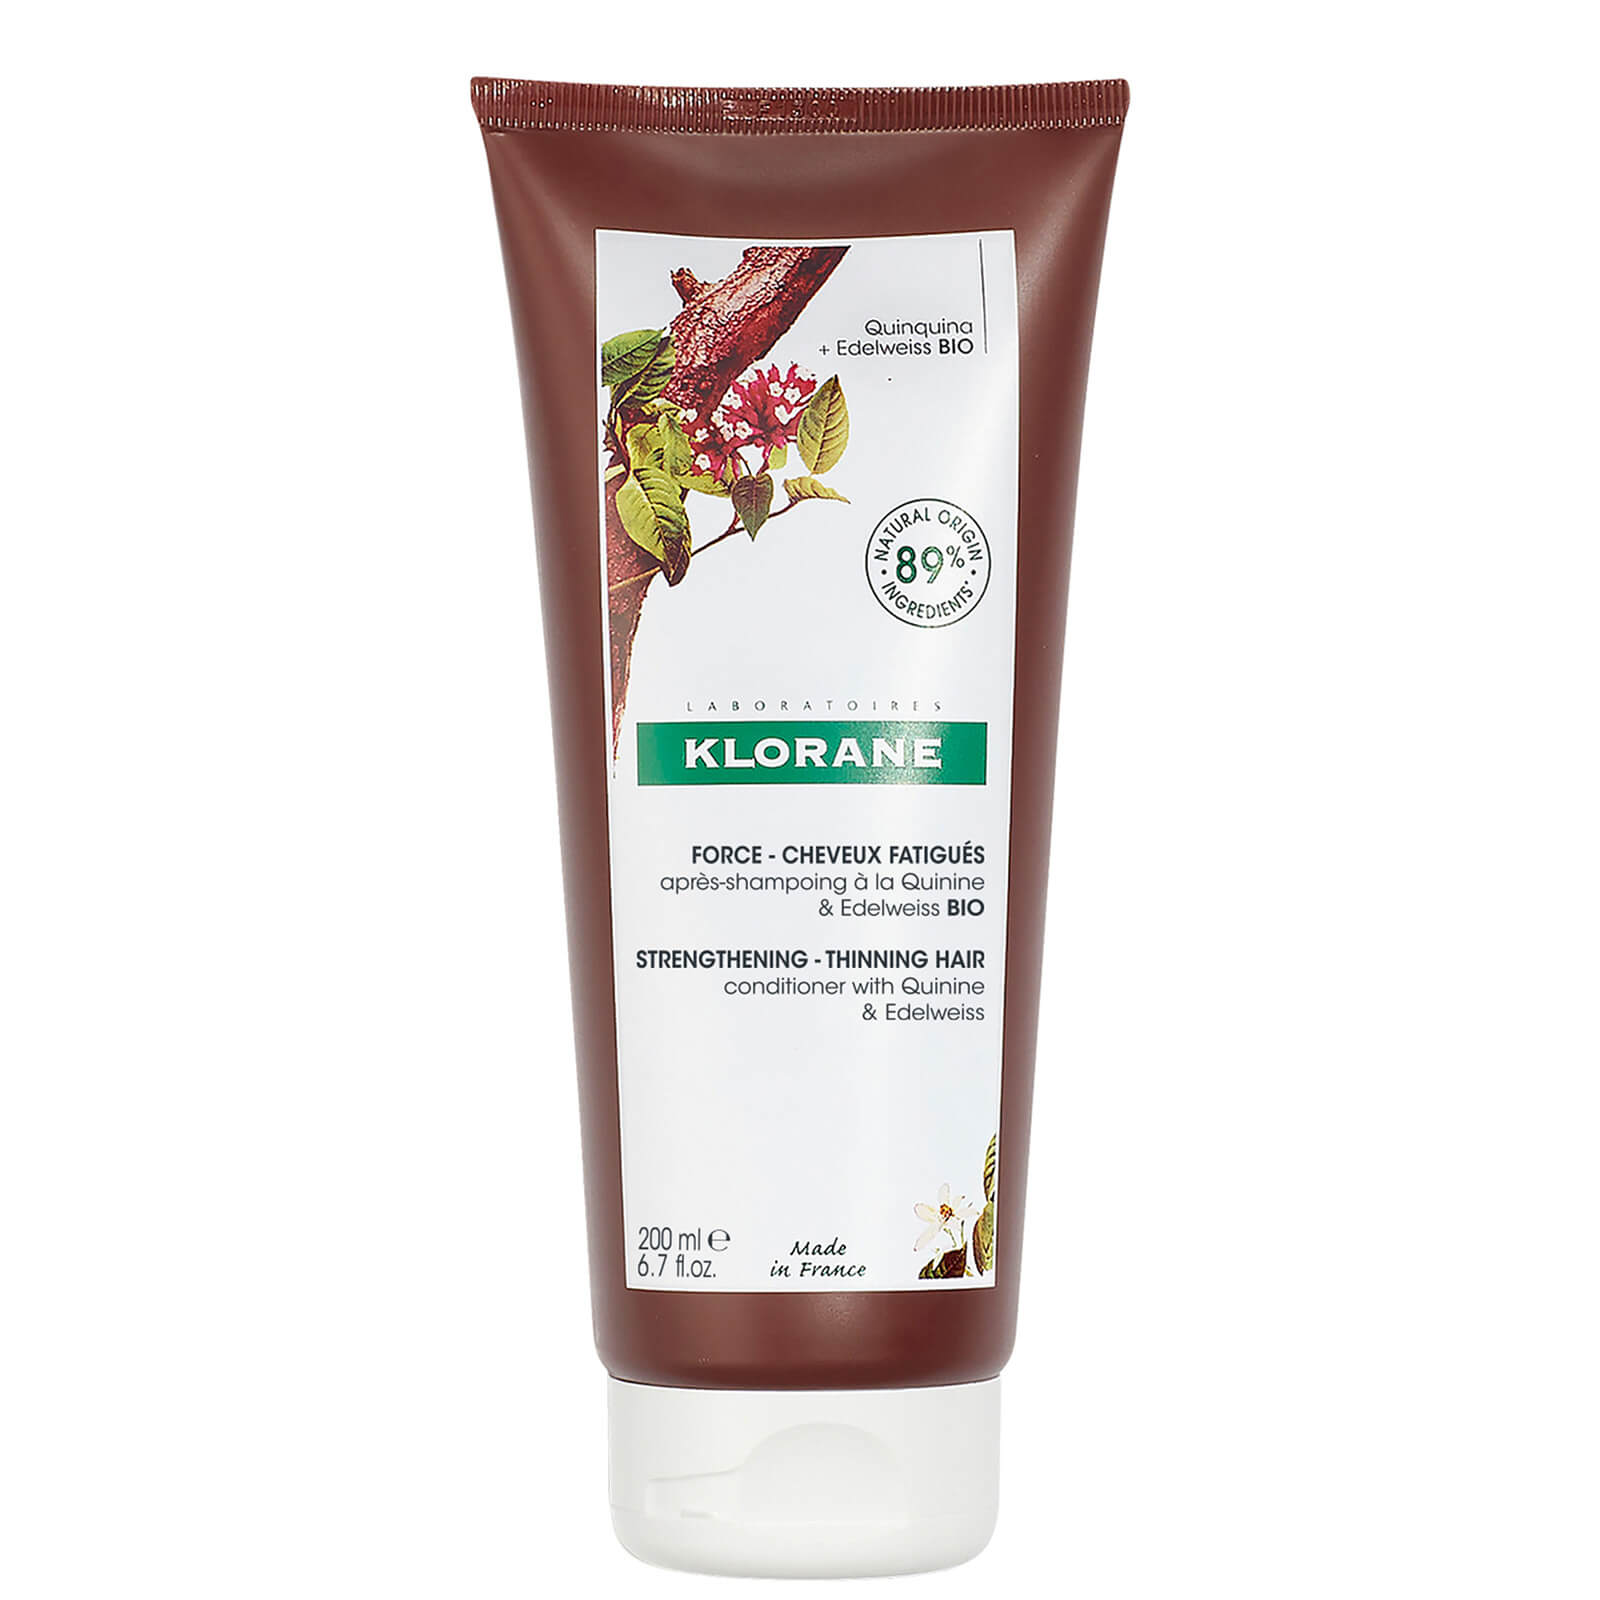 KLORANE Strengthening Conditioner with Quinine and Organic Edelweiss for Thinning Hair 200ml lookfantastic.com imagine